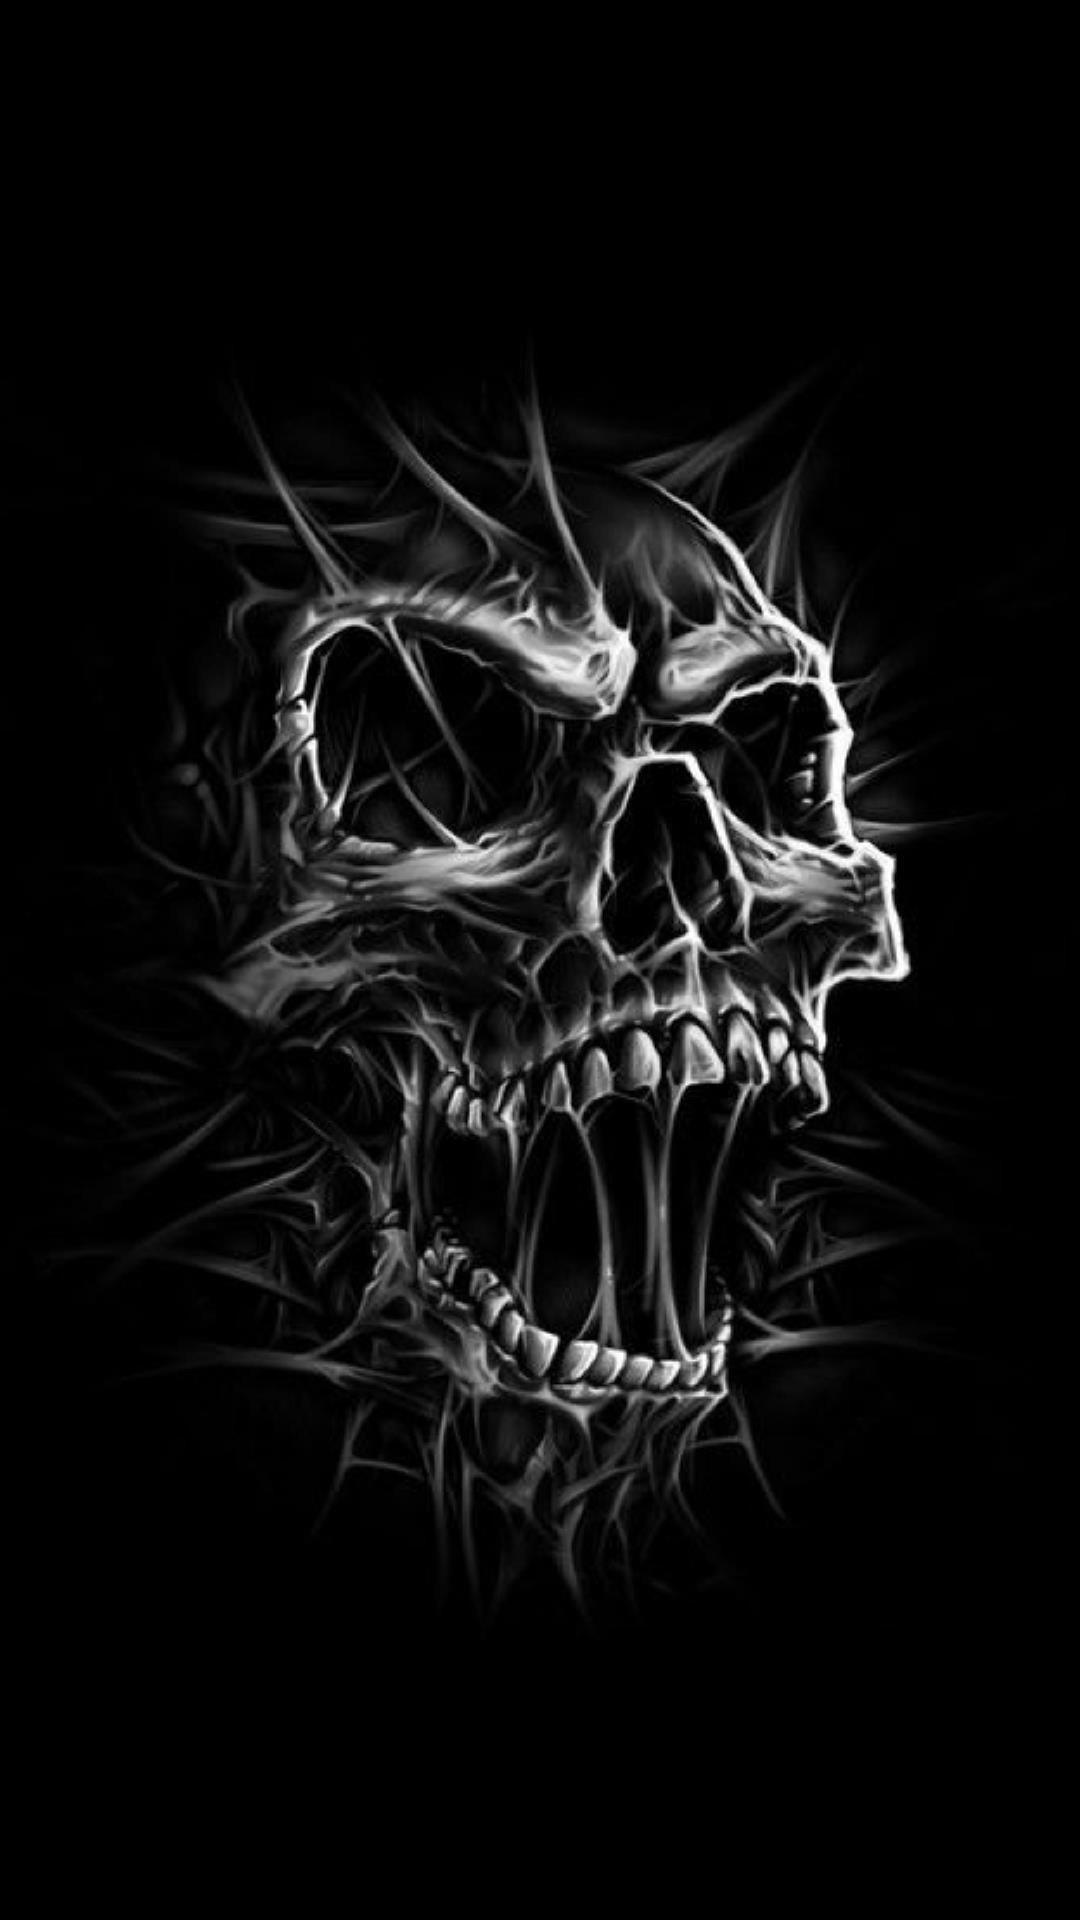 Badass Skull Wallpapers Browse Millions Of Popular Rose Wallpapers And Ringtones On Zedge And